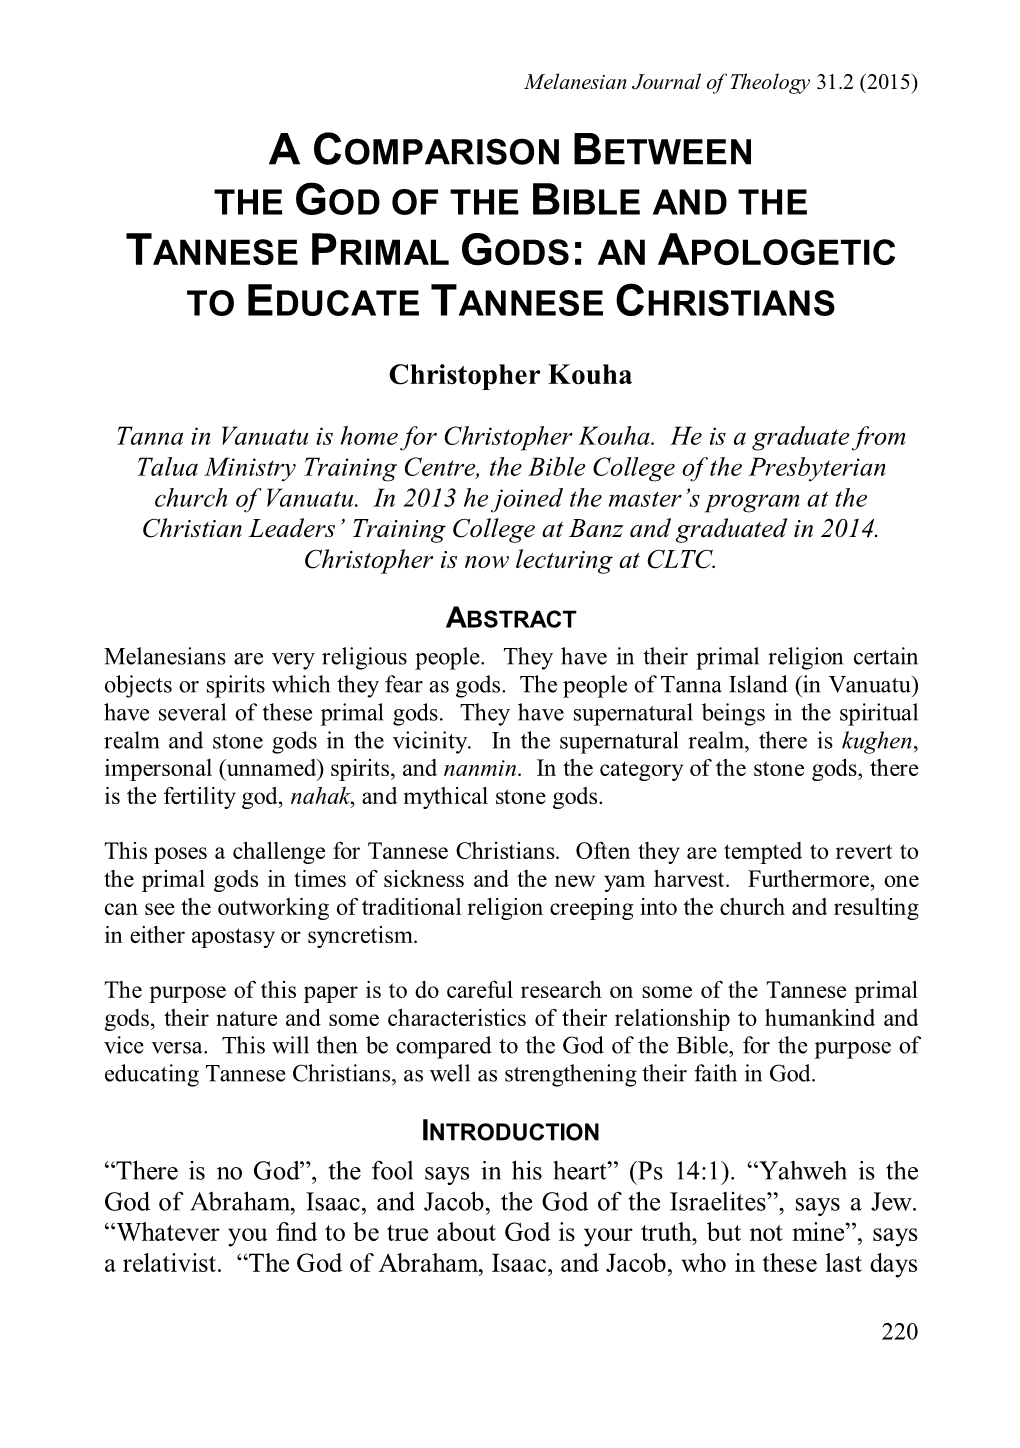 A Comparison Between the God of the Bible and the Tannese Primal Gods: an Apologetic to Educate Tannese Christians